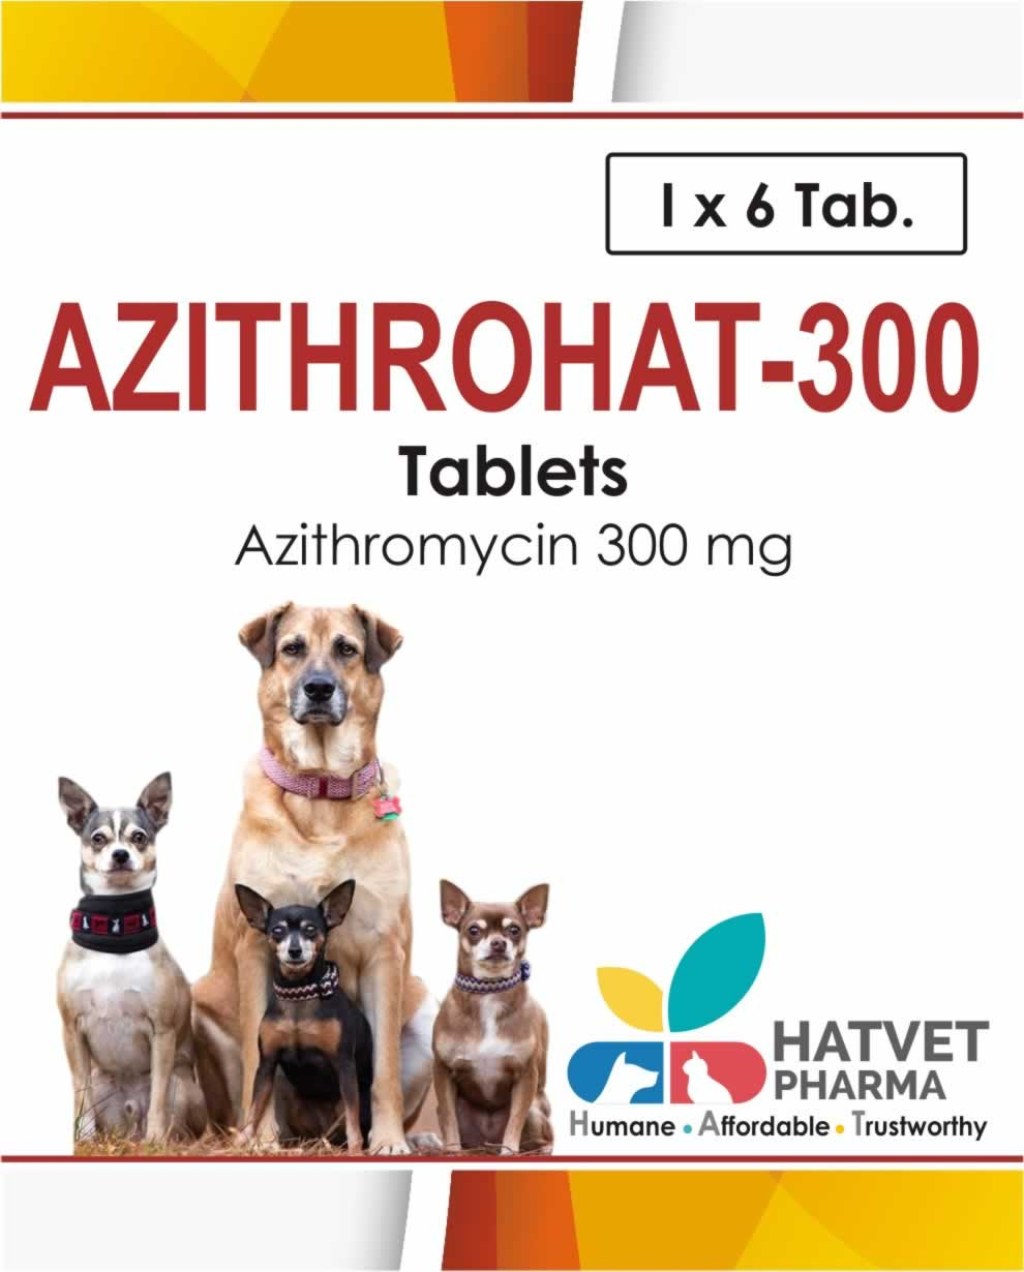 Picture of: Azithrohat  Tablets – HATVET PHARMA